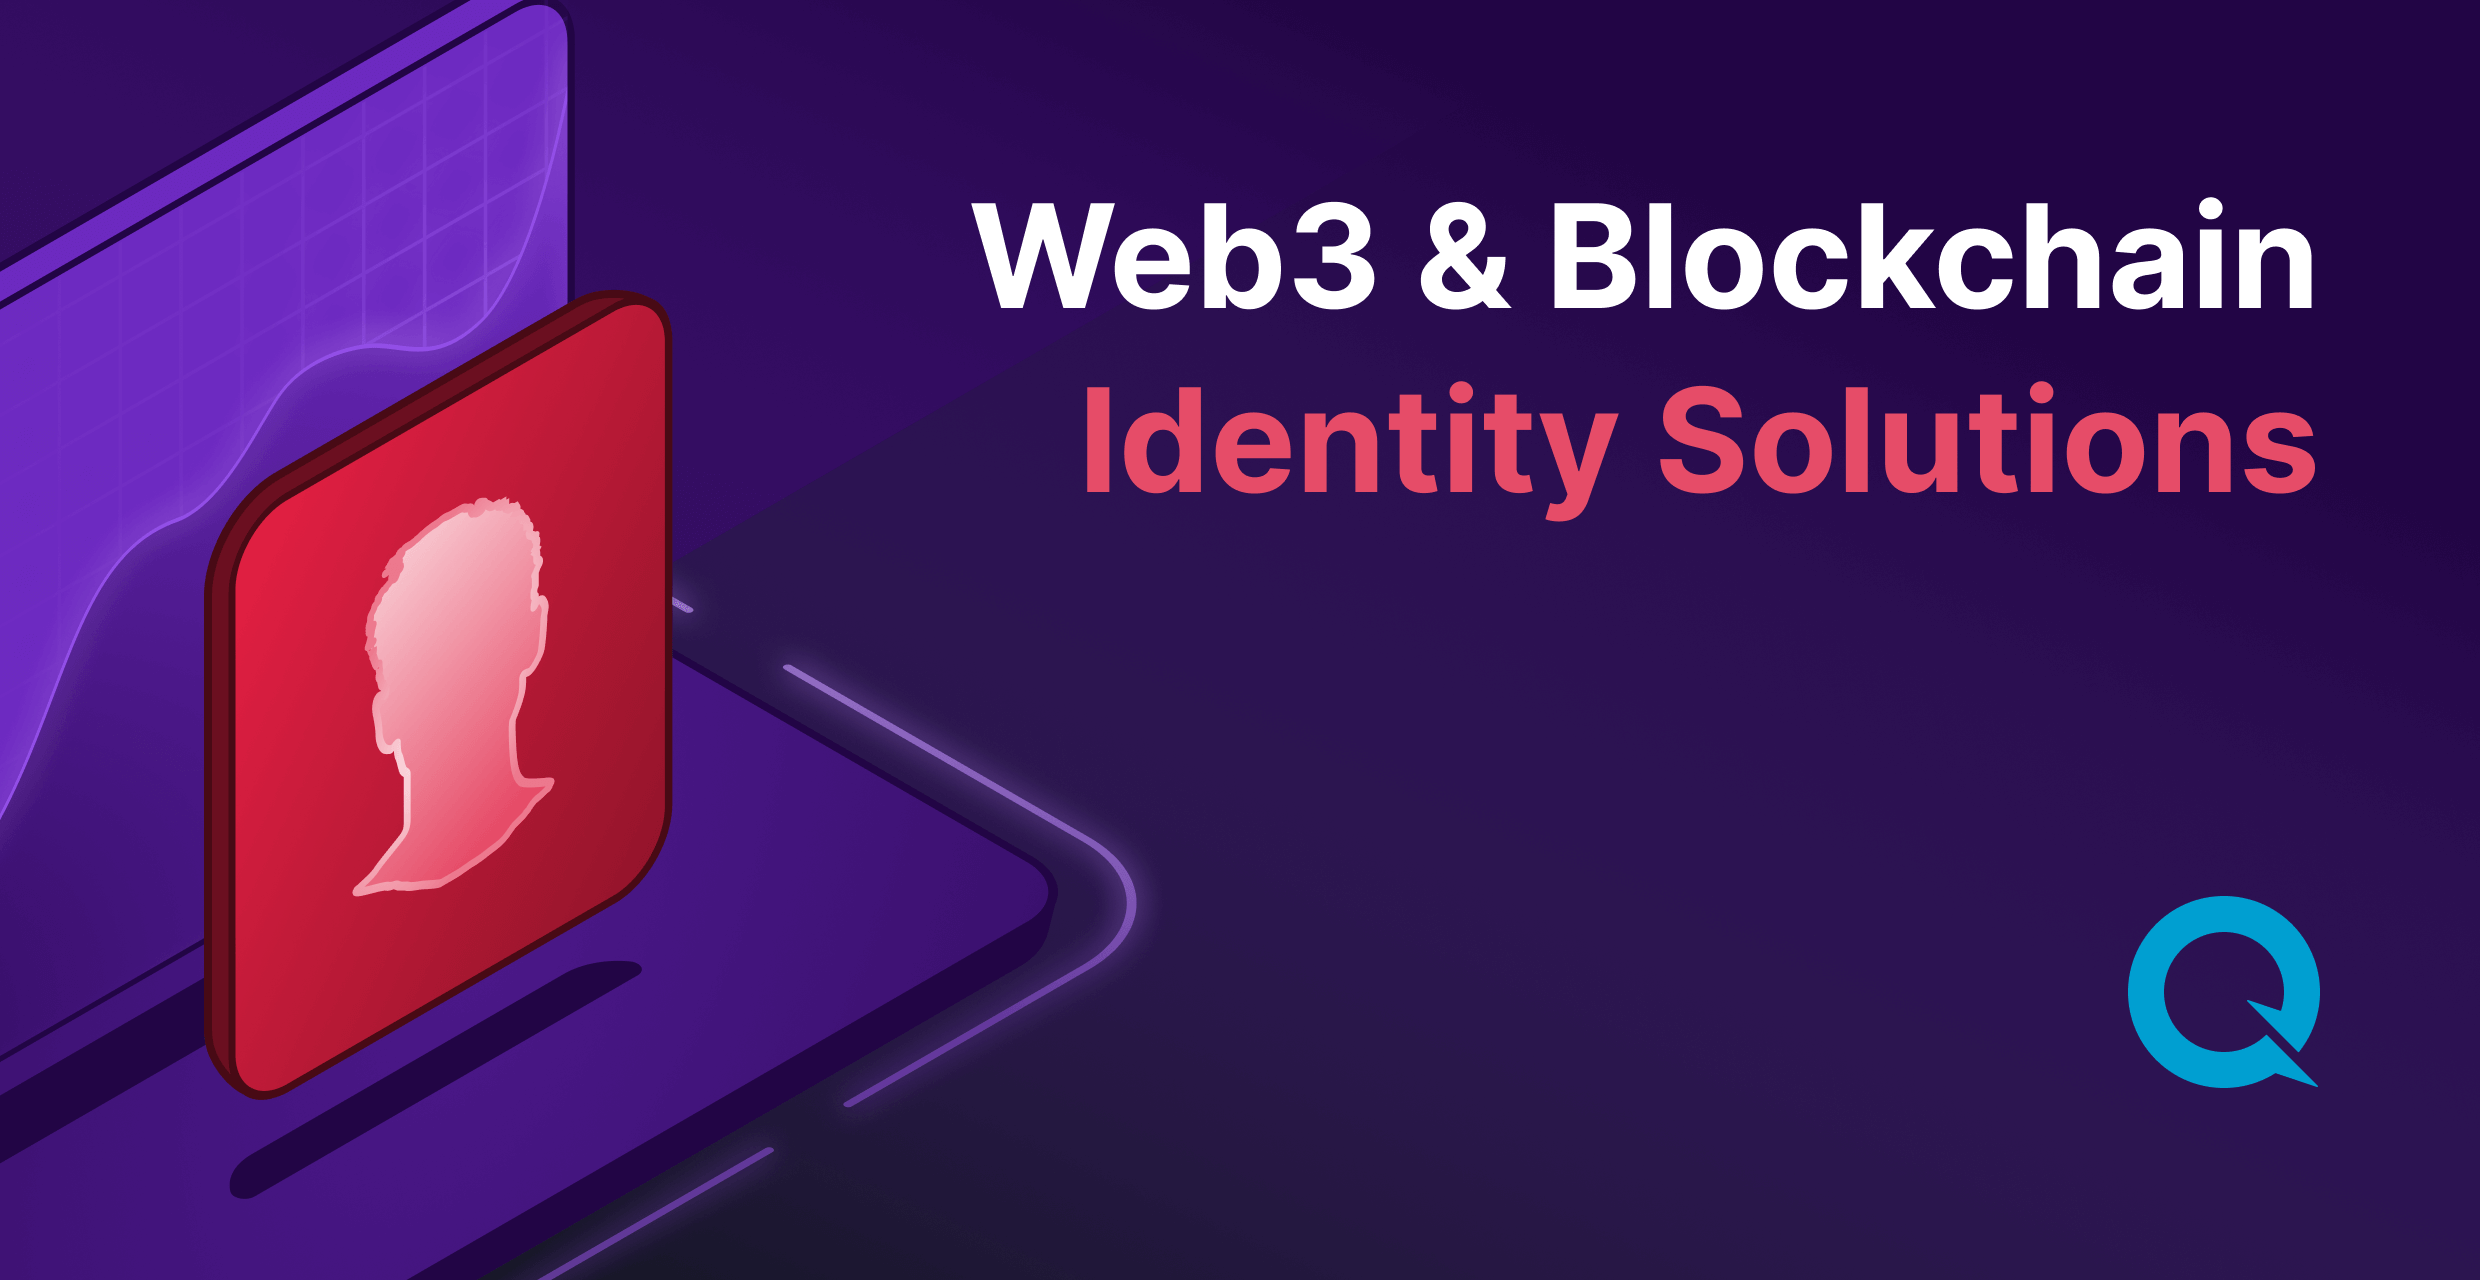 Web3 and Blockchain Identity Solutions for More Protected, Convenient Digital Identities